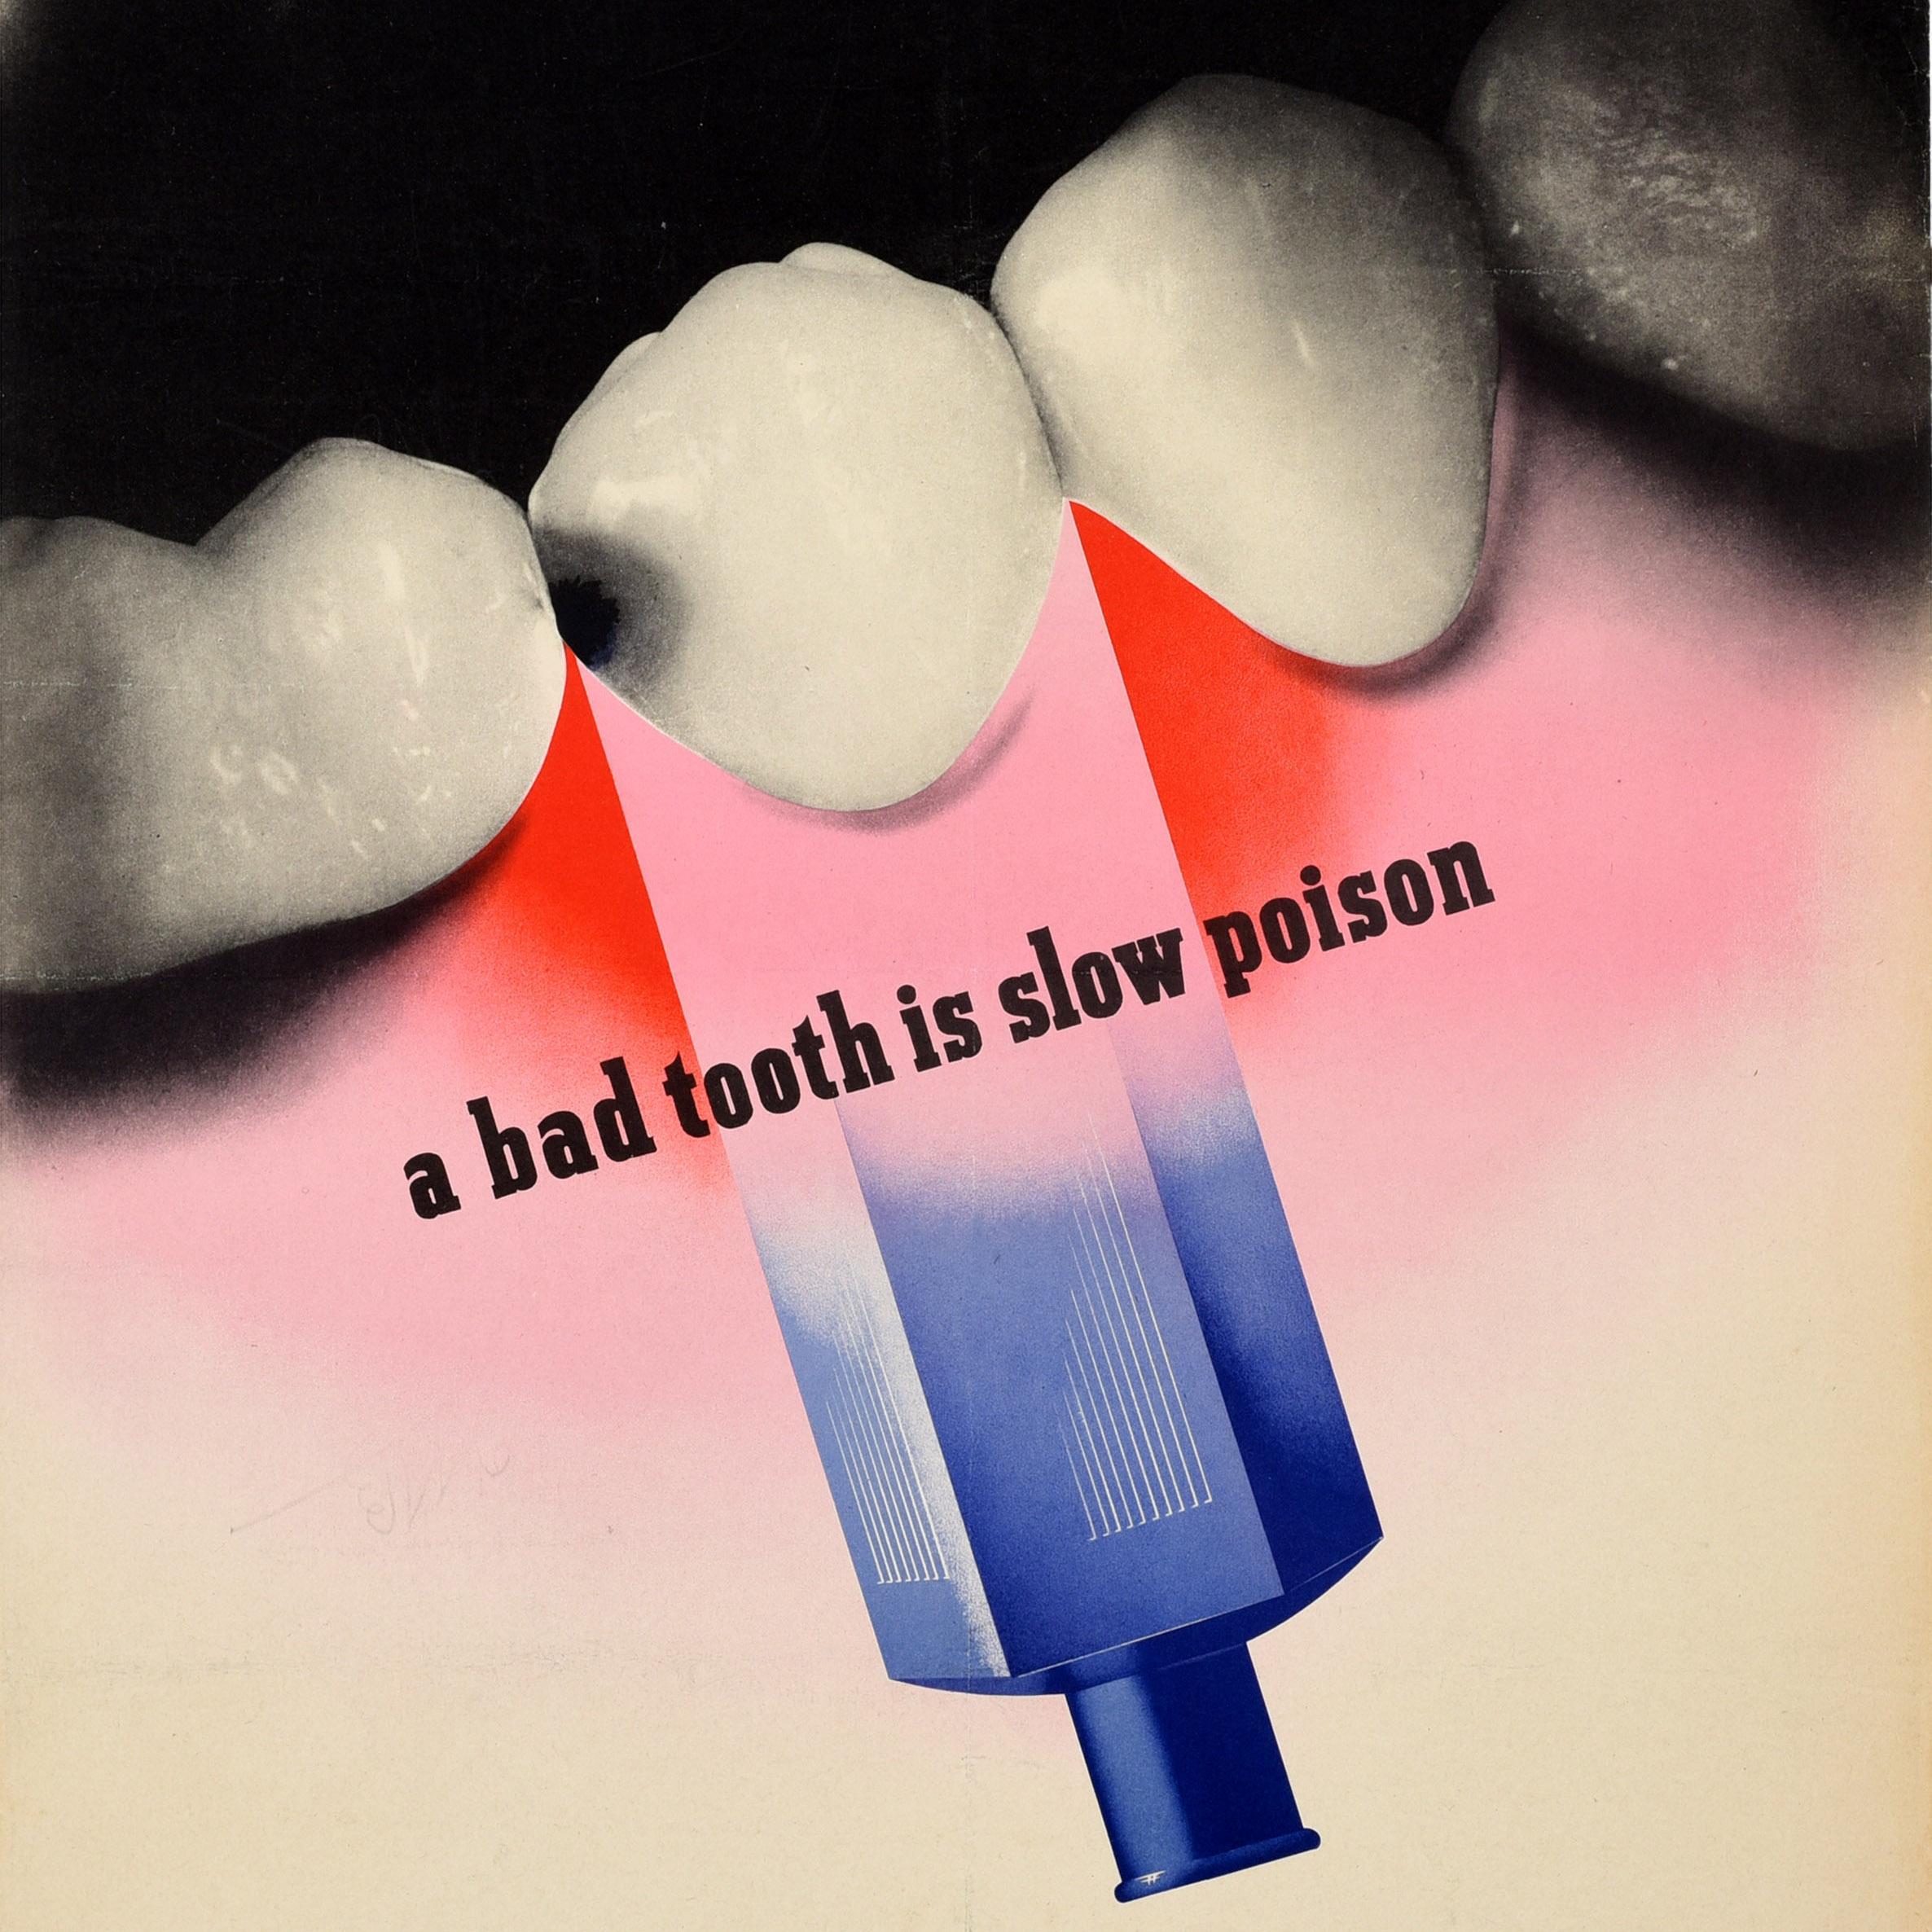 Original vintage World War Two military health poster - A bad tooth is slow poison Visit your Dental Officer regularly - featuring a great design by the notable British graphic designer Abram Games (Abraham Gamse; 1914-1996) depicting a black and